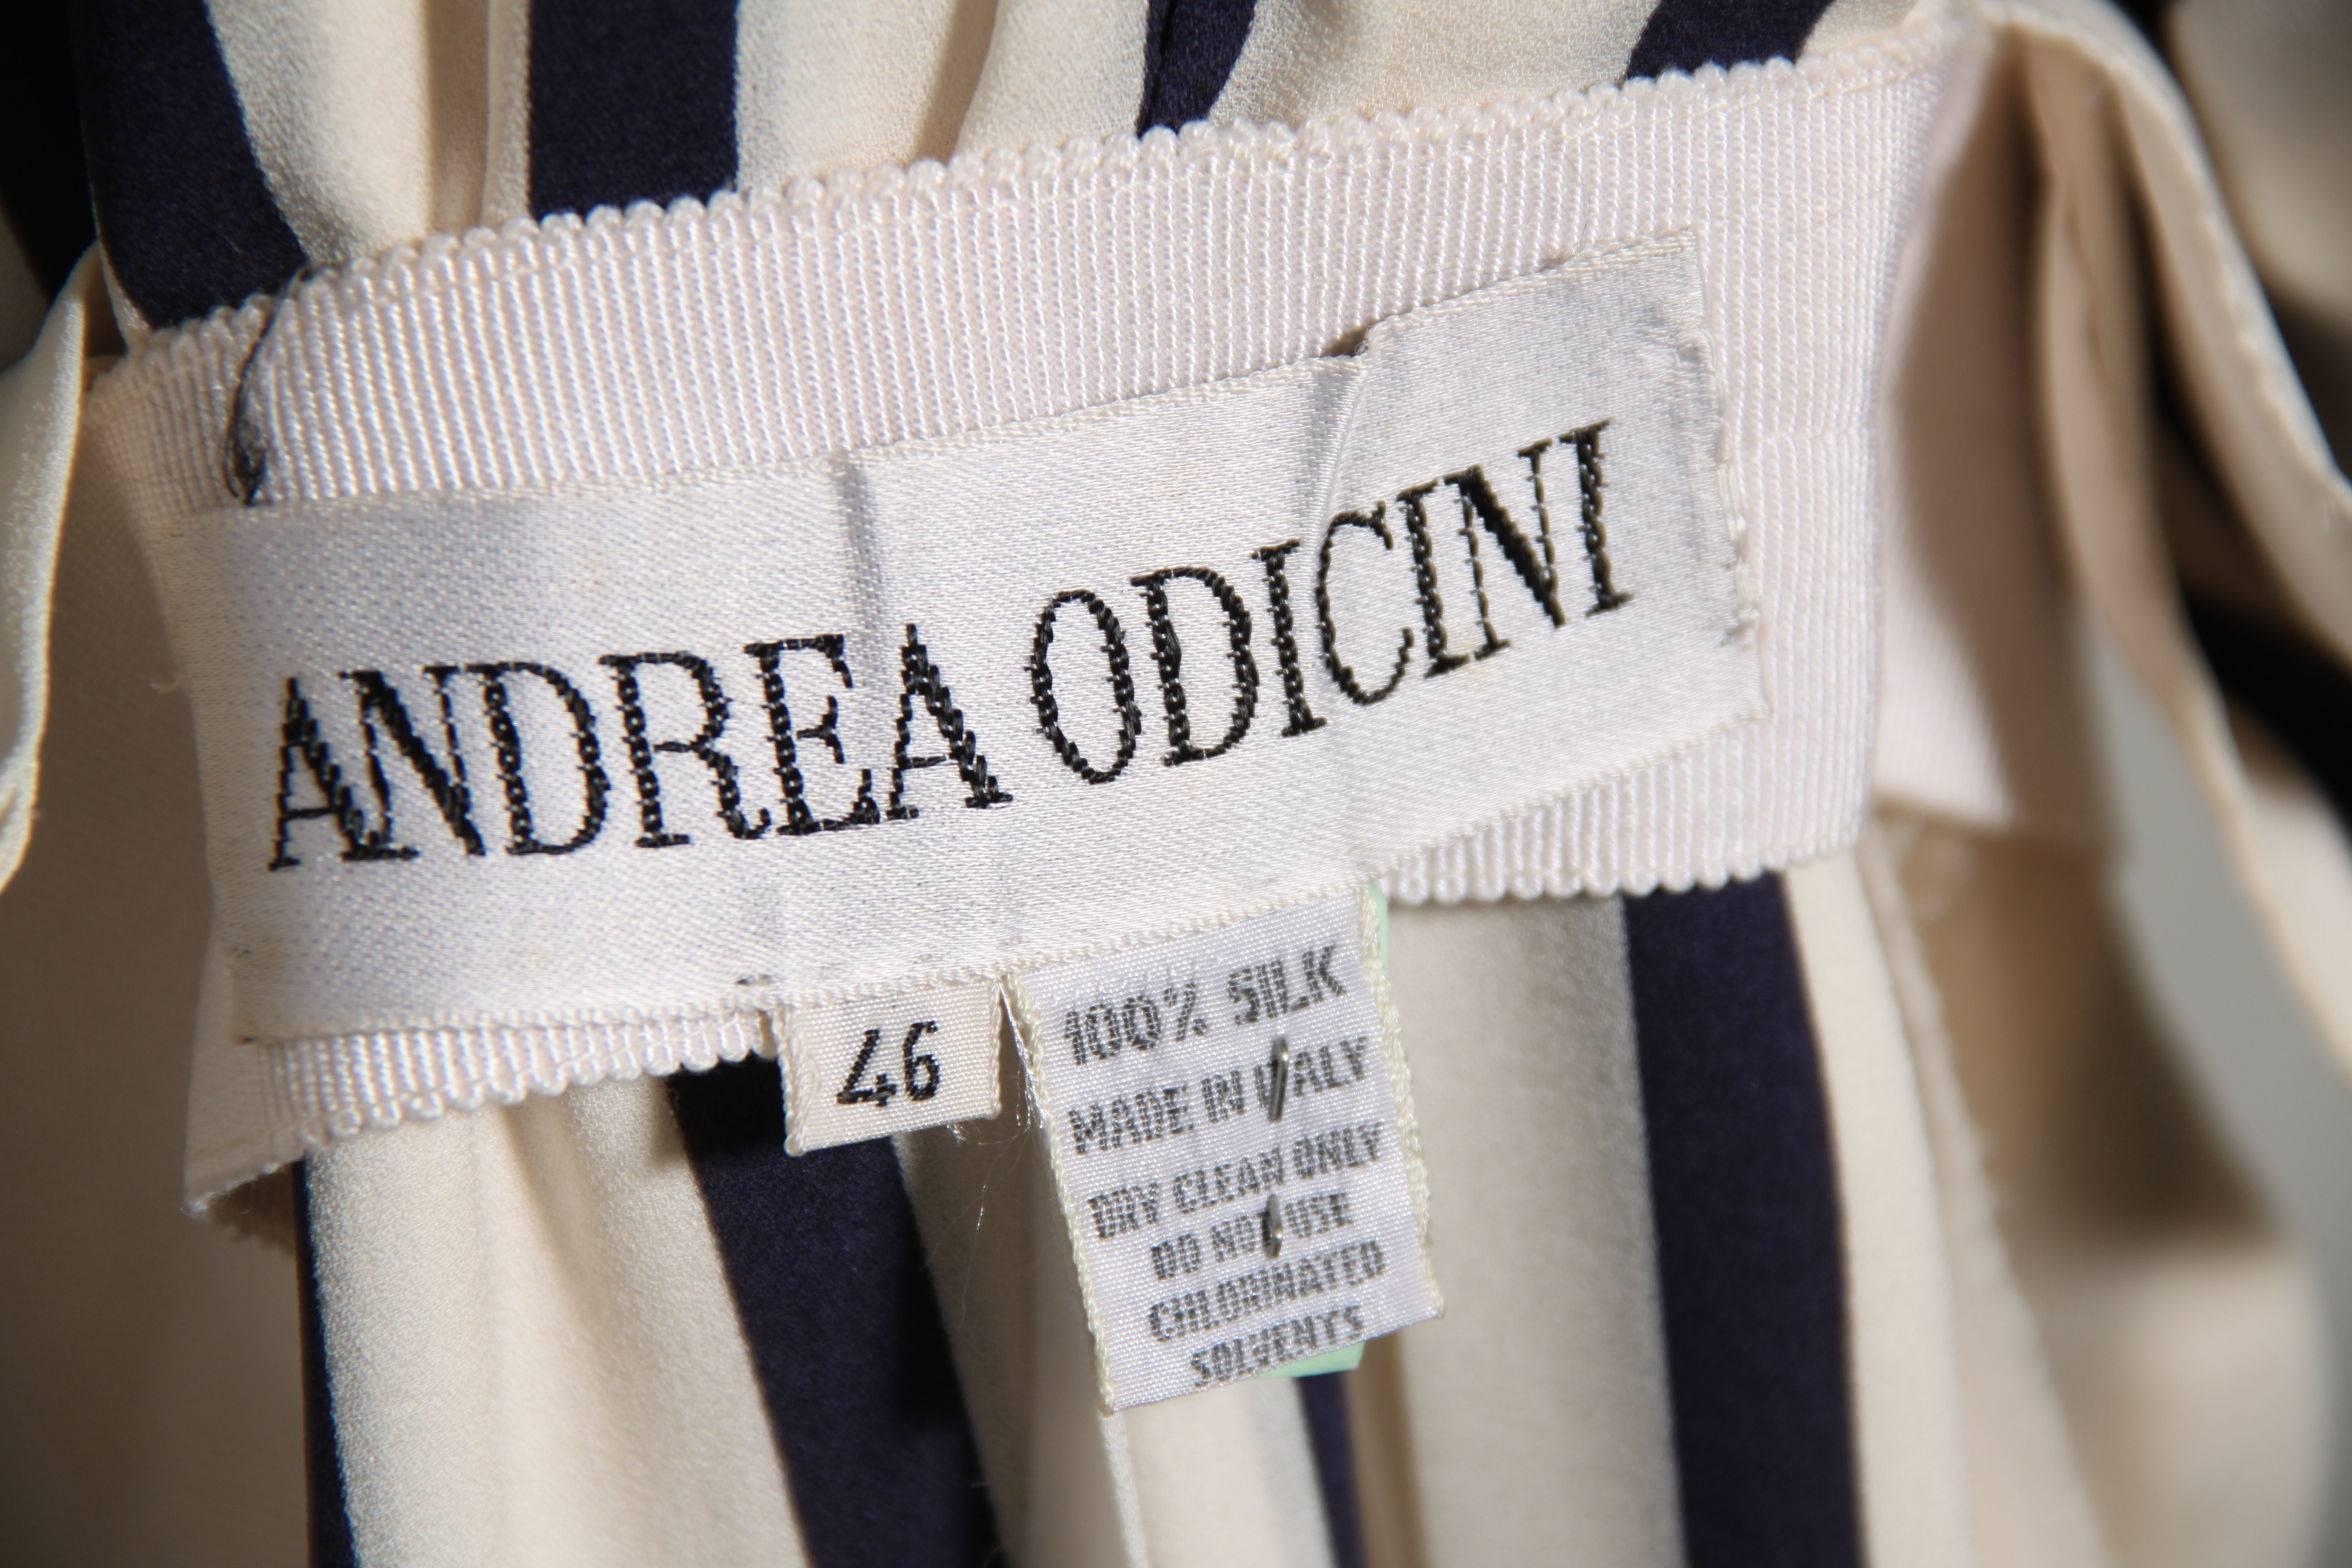 Andrea Odicini Italian Authentic Vintage White and Navy Striped Shirt Dress 4